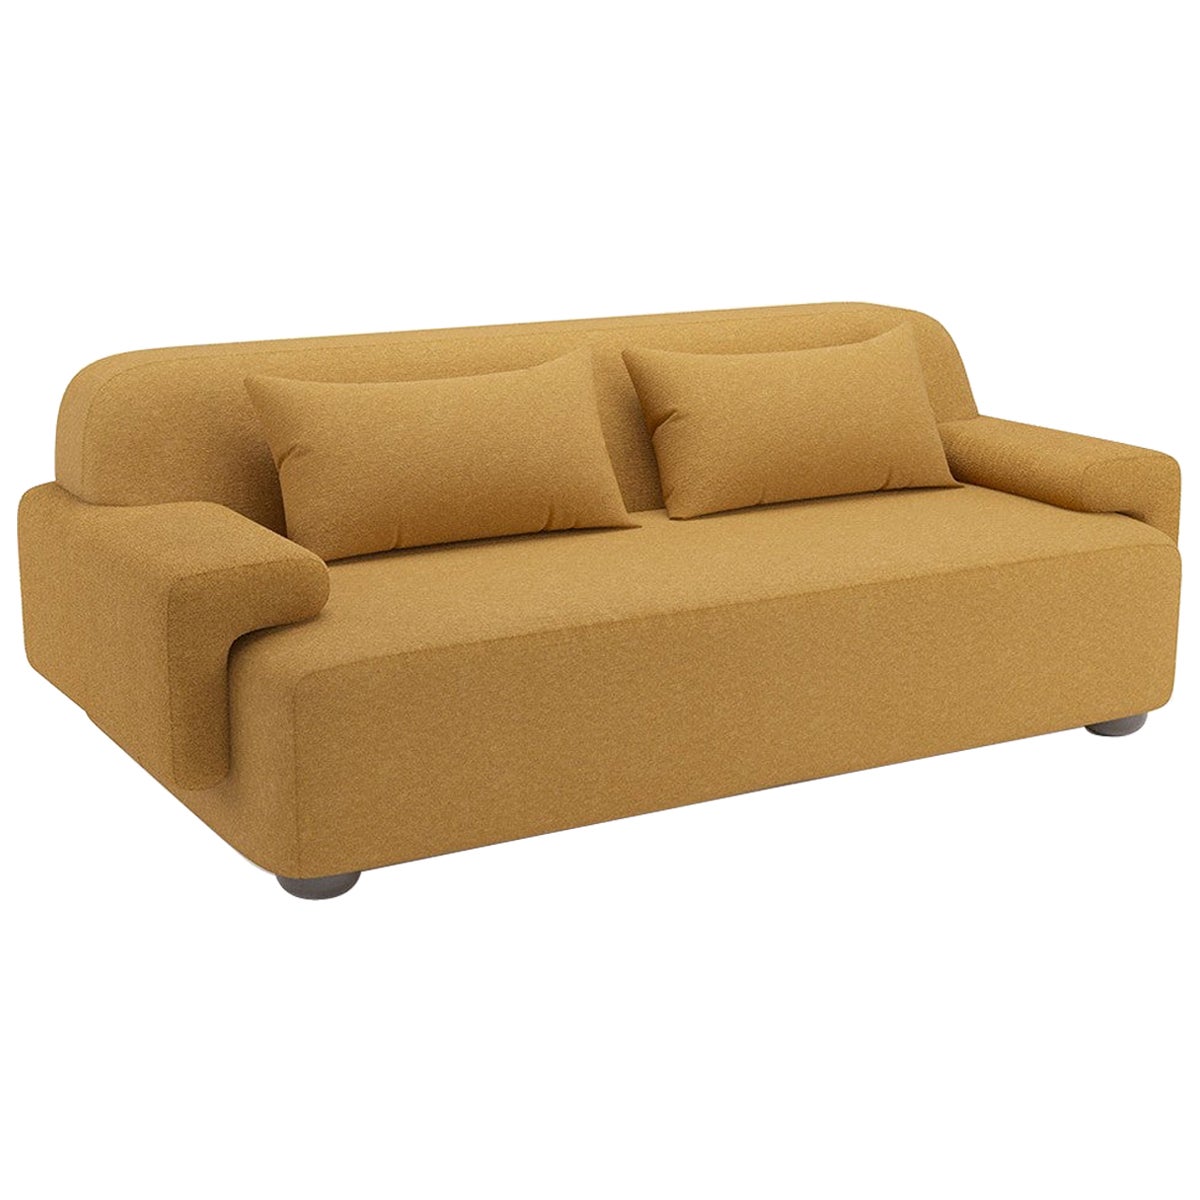 Popus Editions Lena 4 Seater Sofa in Curry Cork Linen Upholstery For Sale